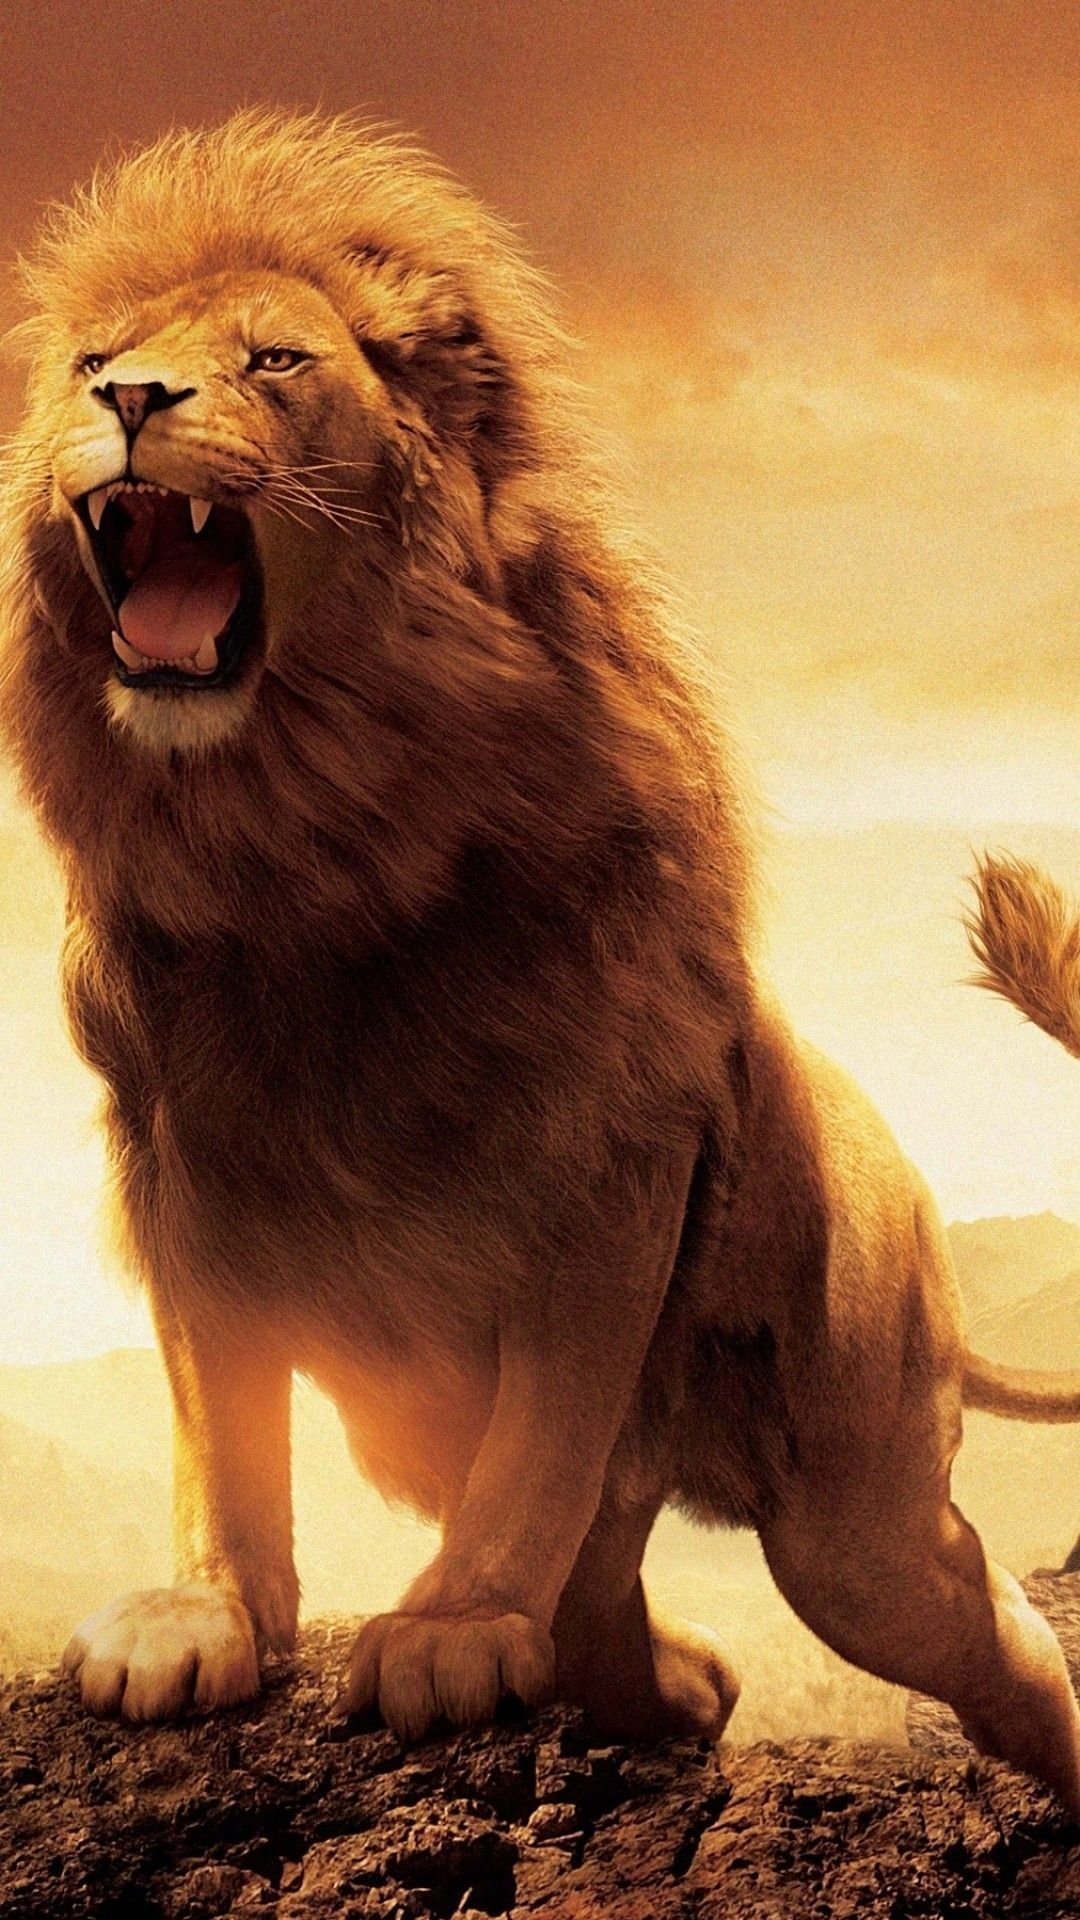 Angry Lion Gallery 551223285 Wallpaper for Free - Fine HDQ Pic